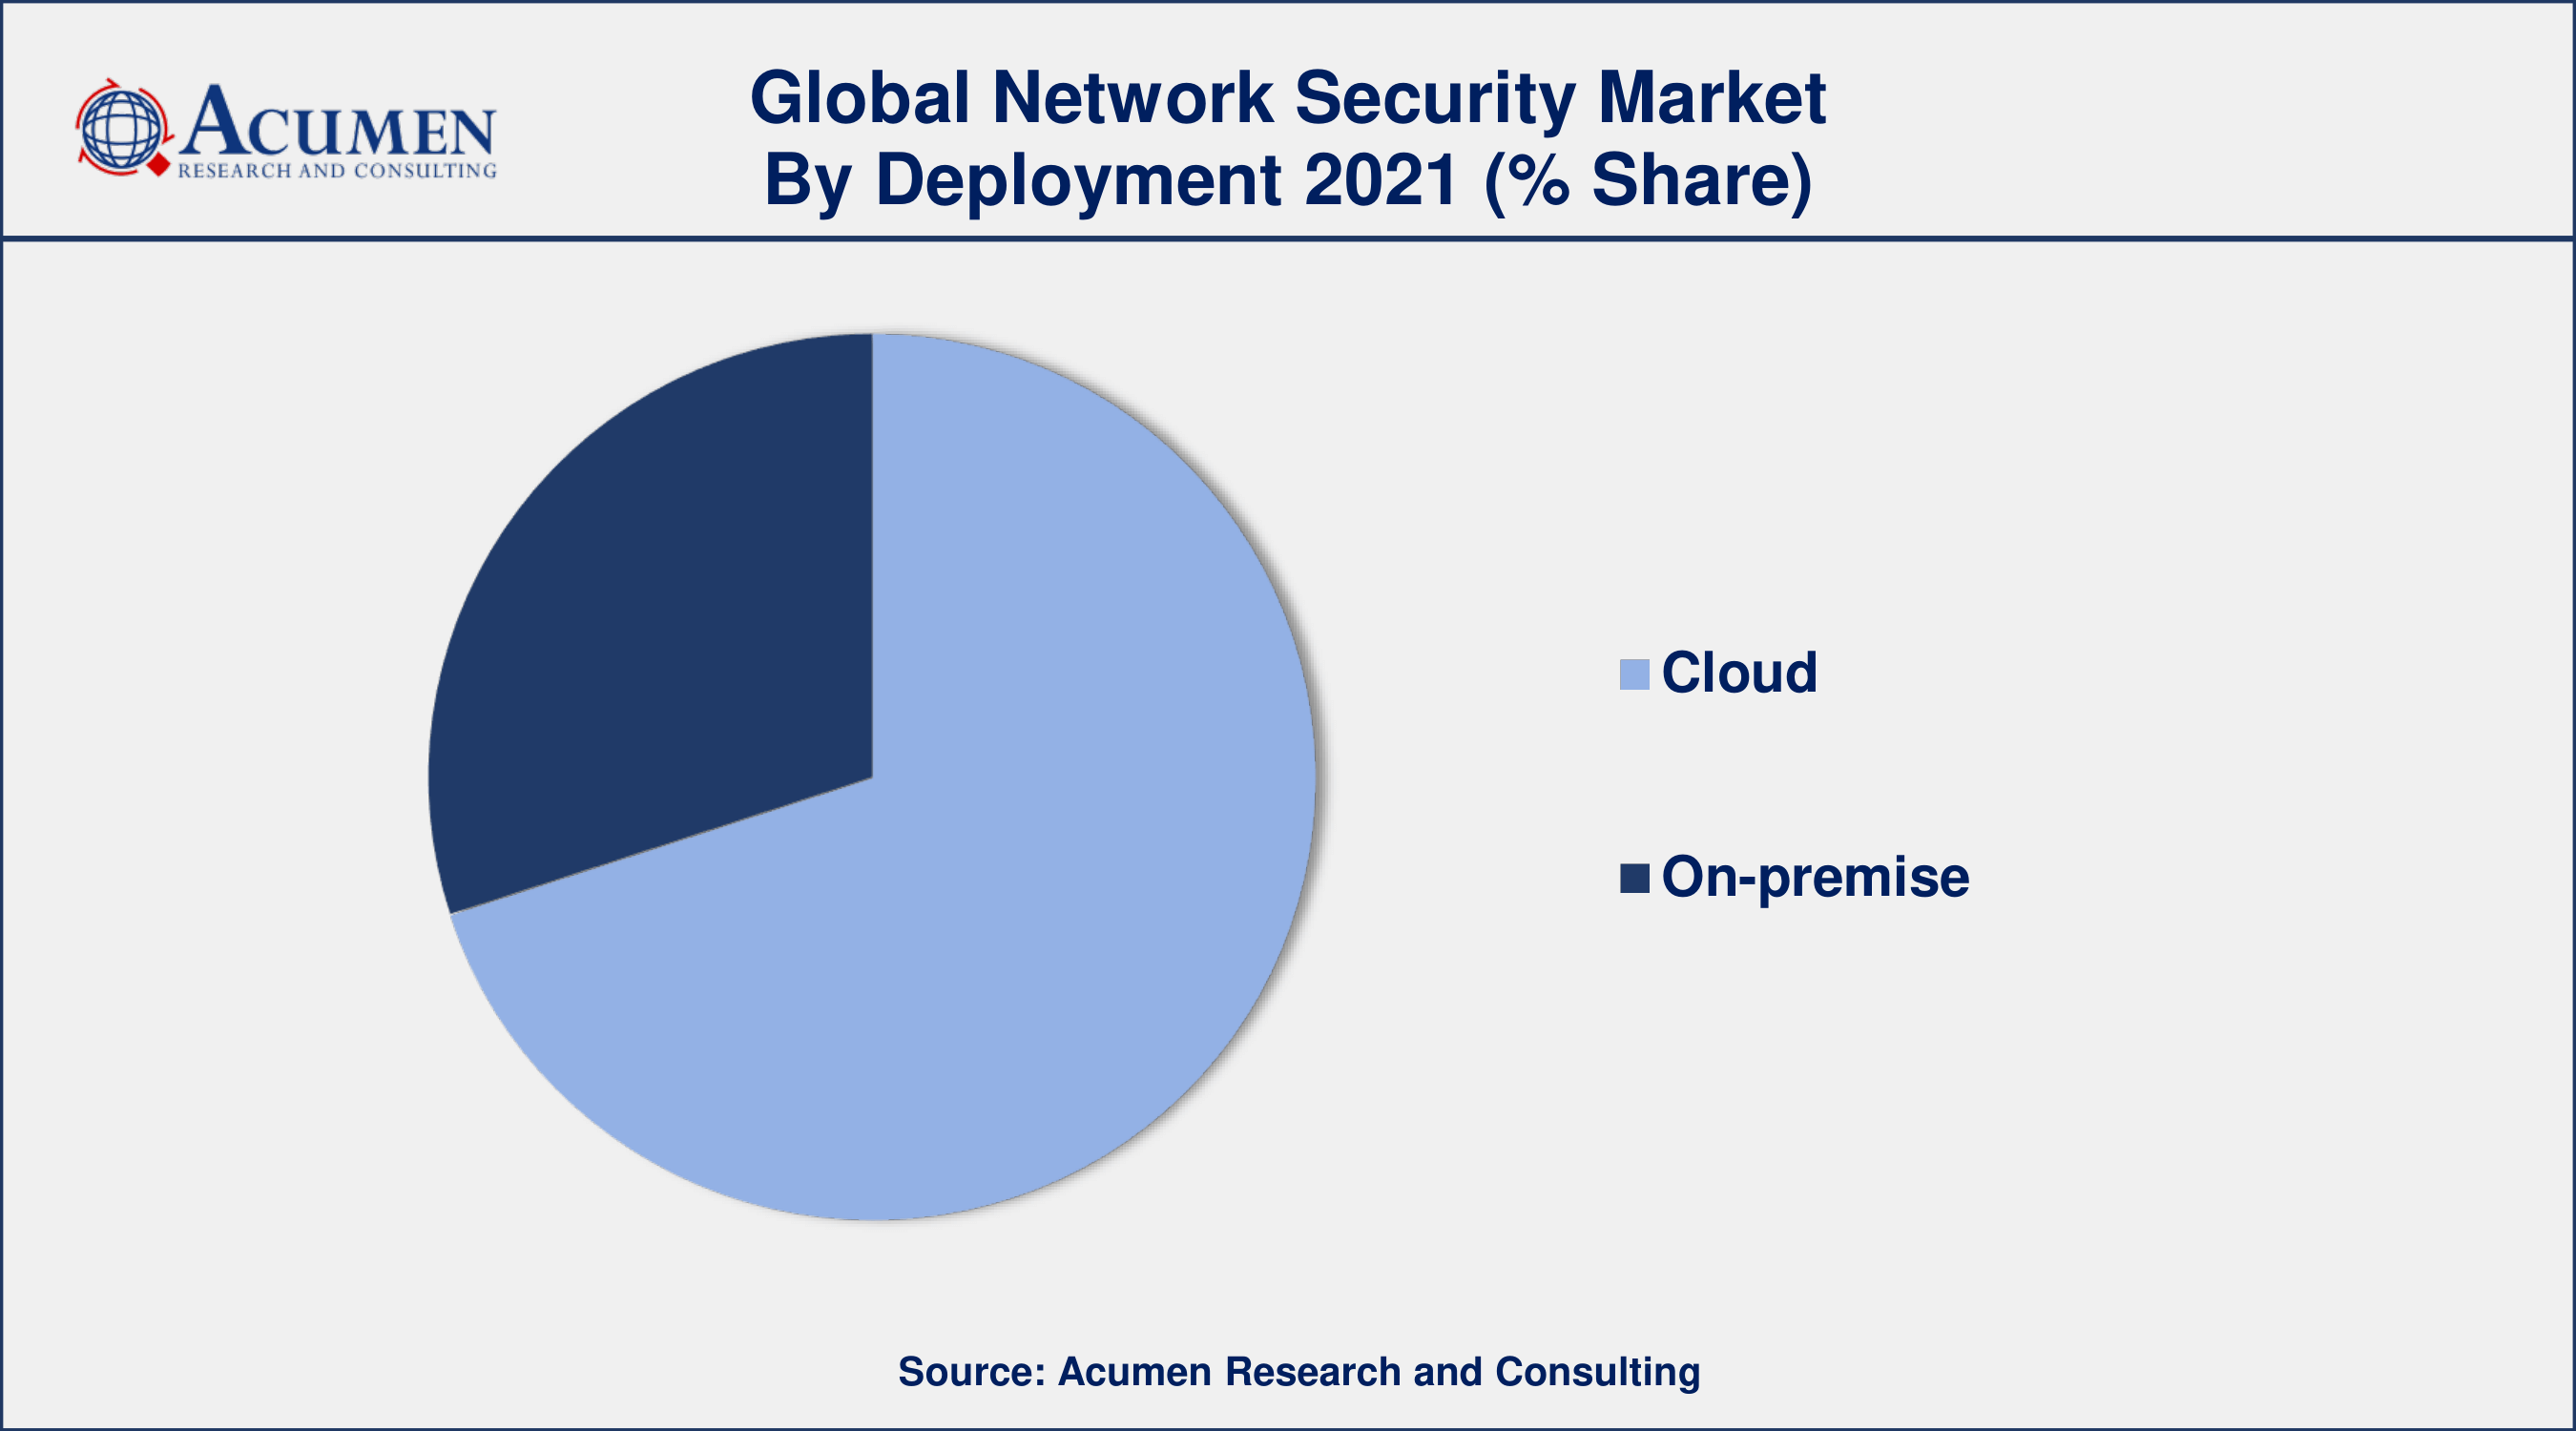 By deployment, cloud segment generated about 66% market share in 2021